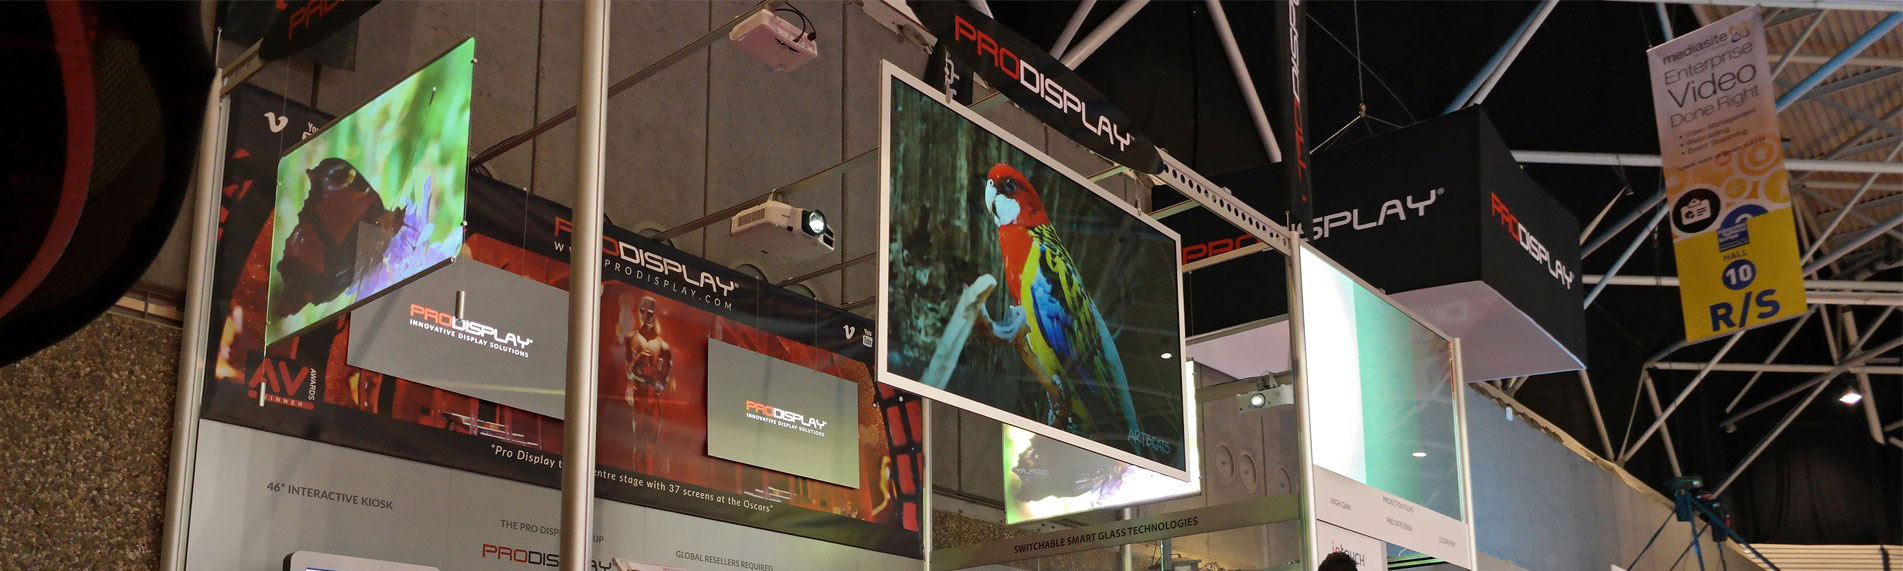 ise2015-homepage-banner-1903x571